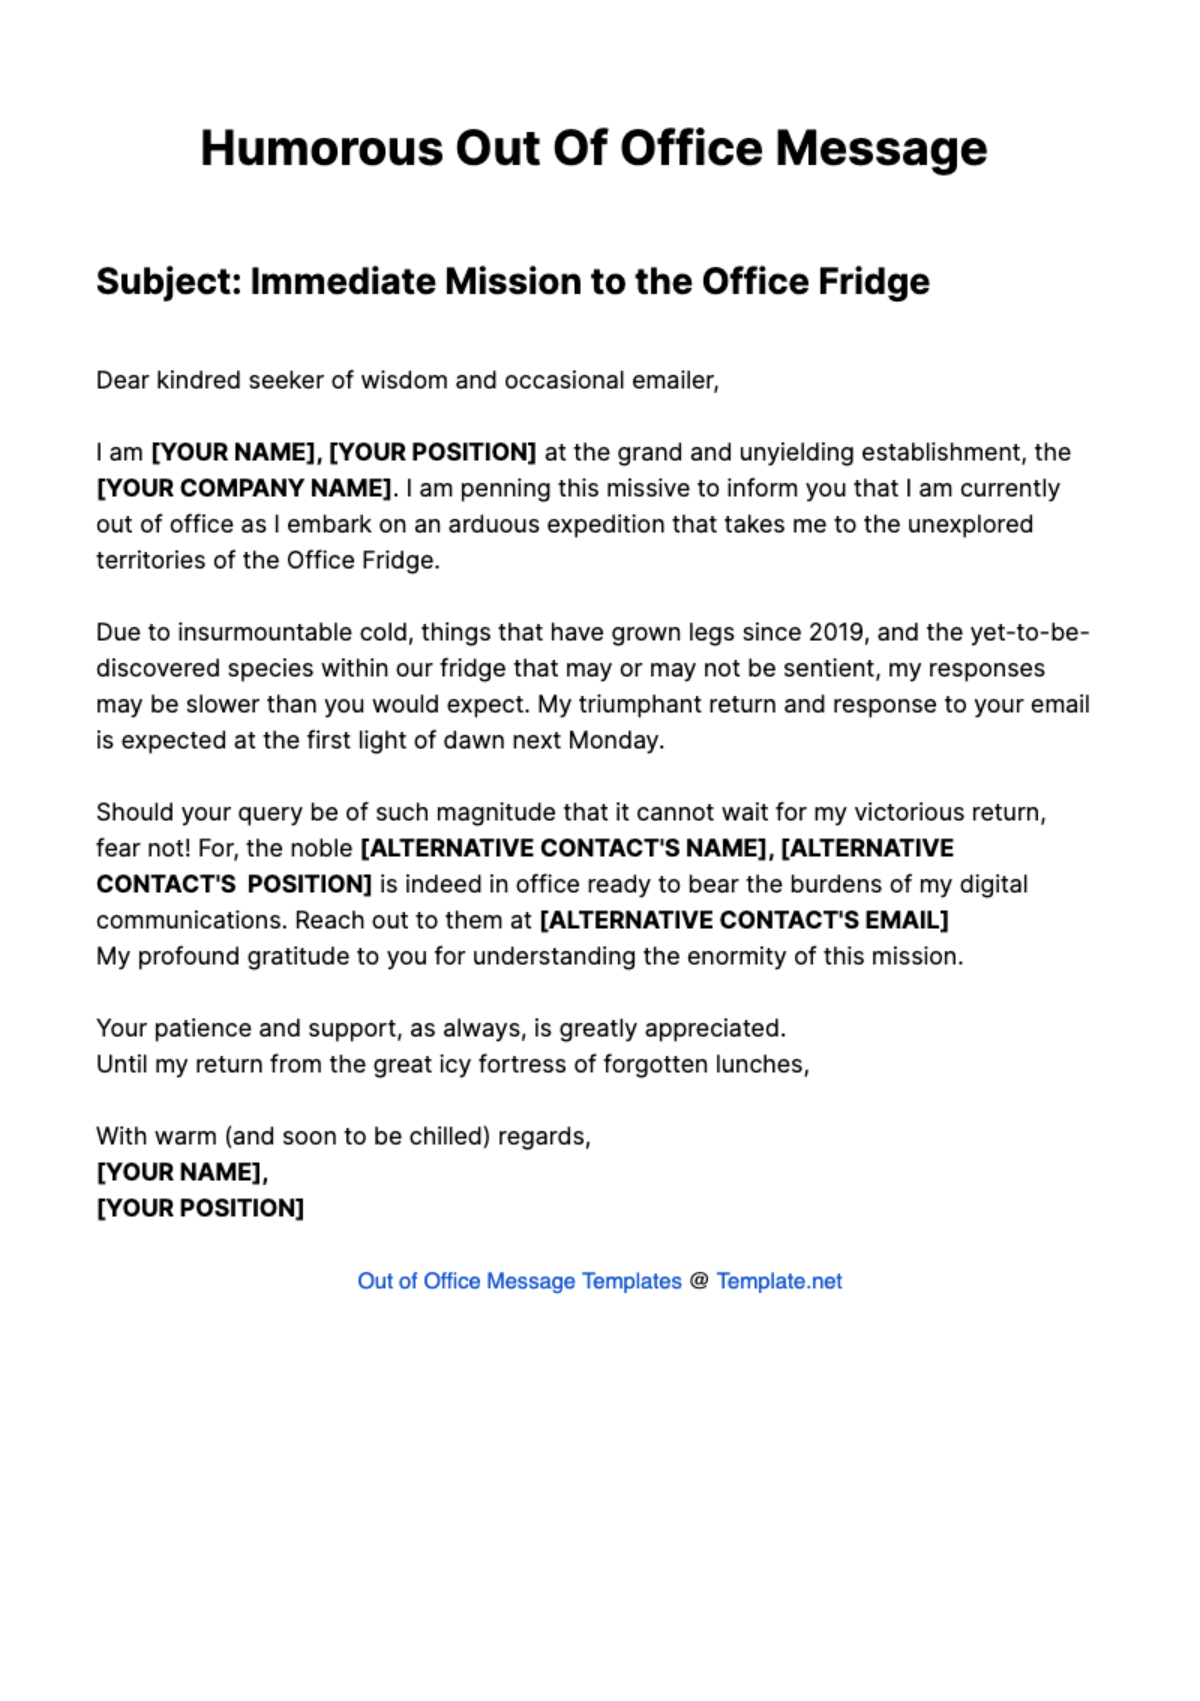 Humorous Out Of Office Message Template